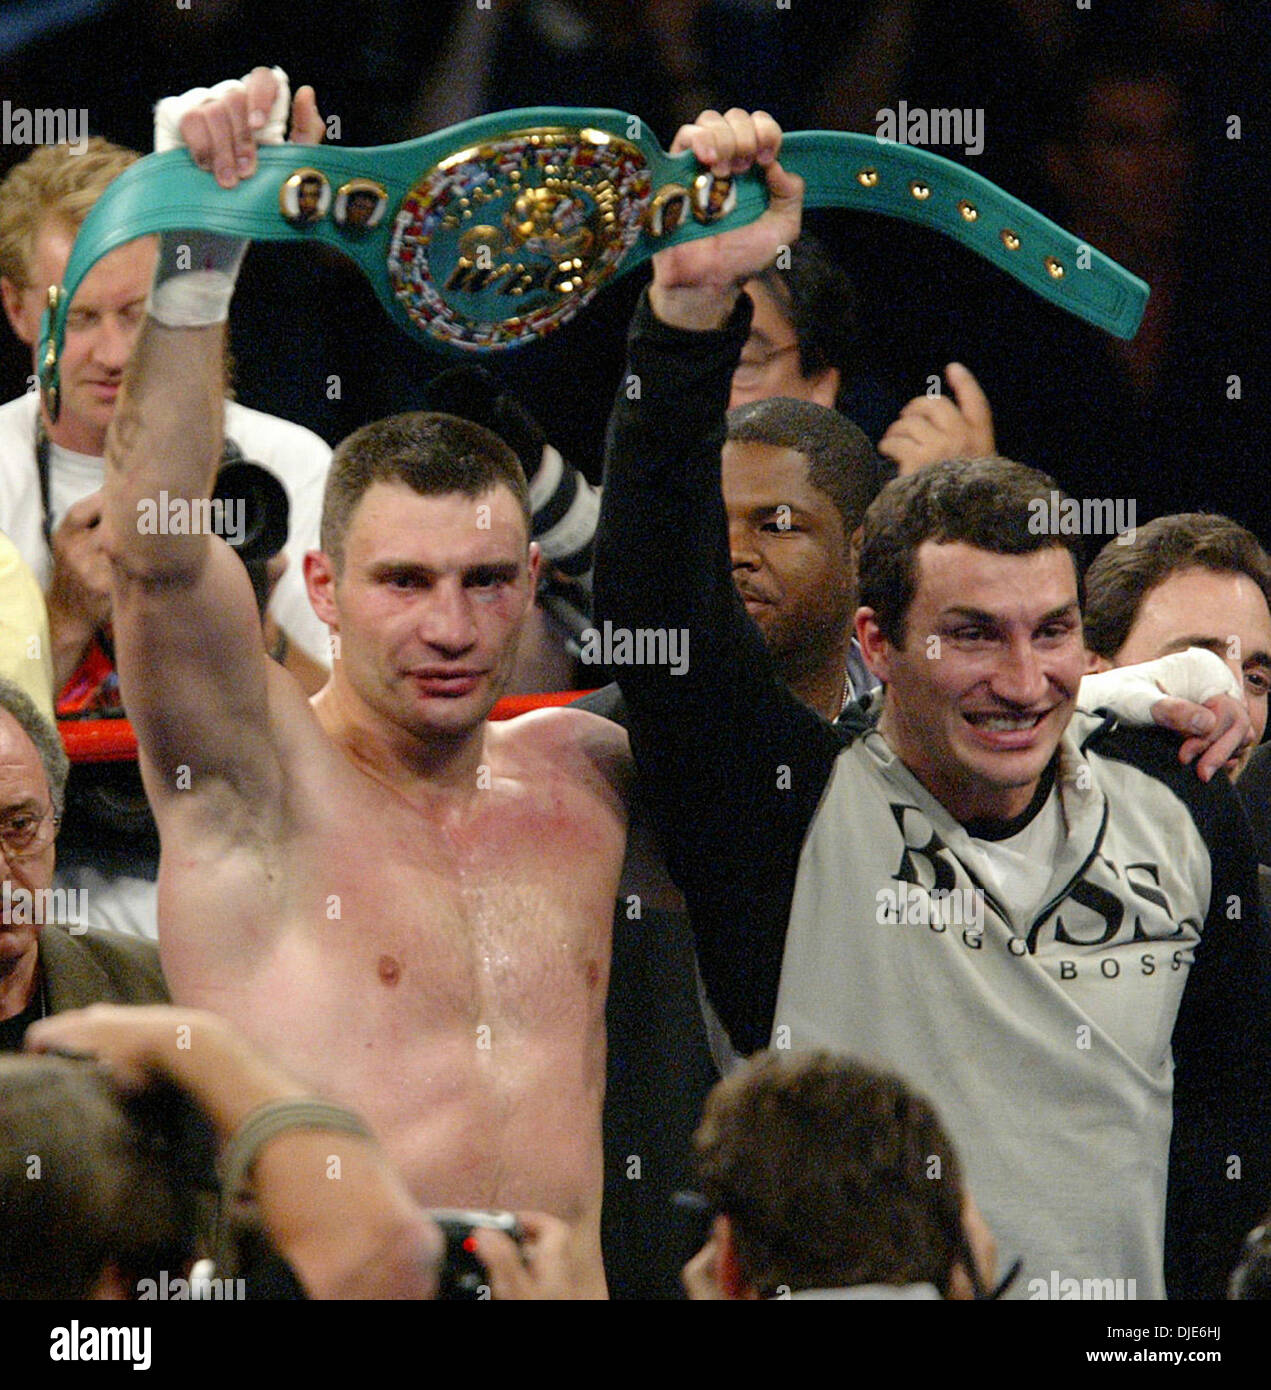 Klitschko Clinches His Way To Victory Over Peter - Boxing News 24